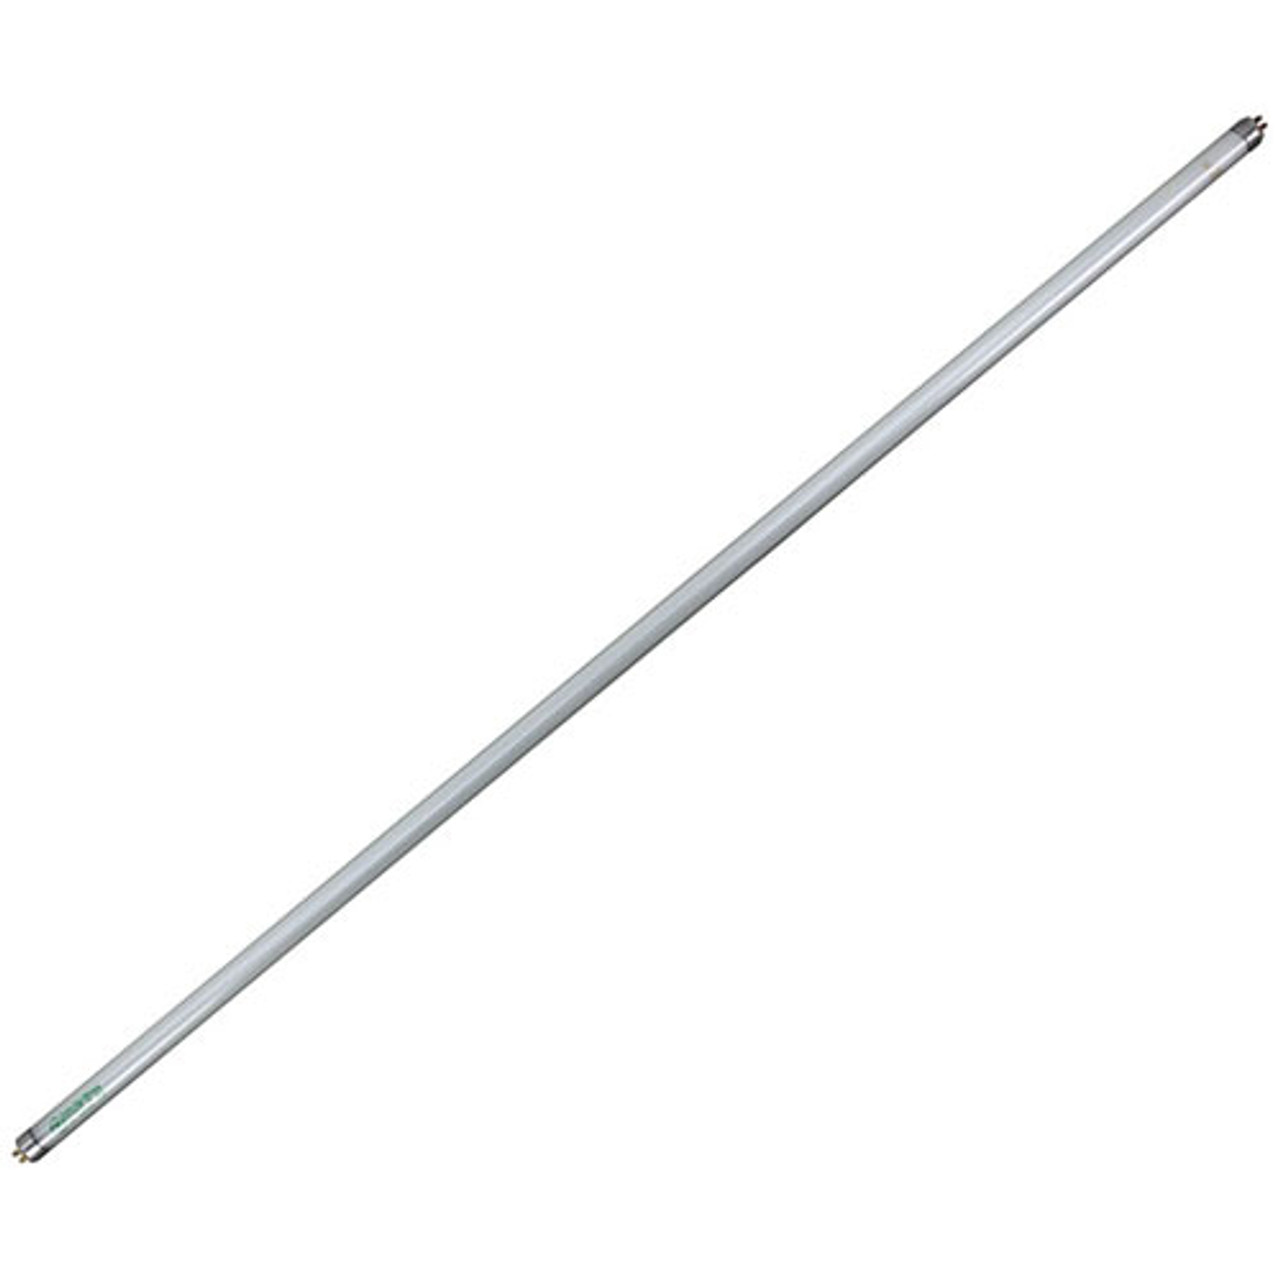 Lamp, Fluorescent -Tuff Coated, 3Ft, Cs/12 - Replacement Part For BKI (Barbeque King) FL0044